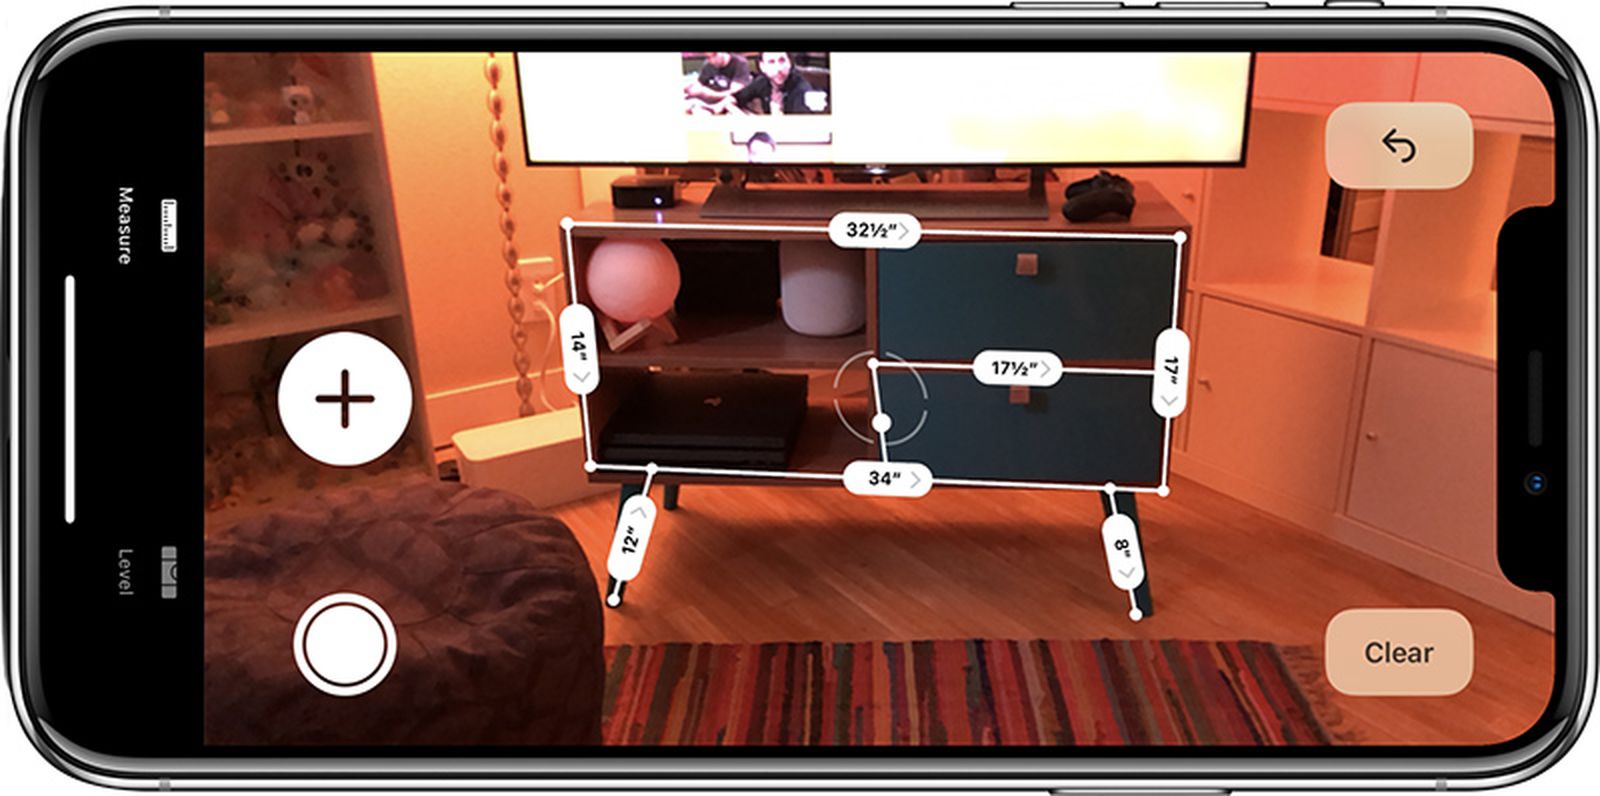 How To Use The New Augmented Reality Measure App In Ios 12 Macrumors